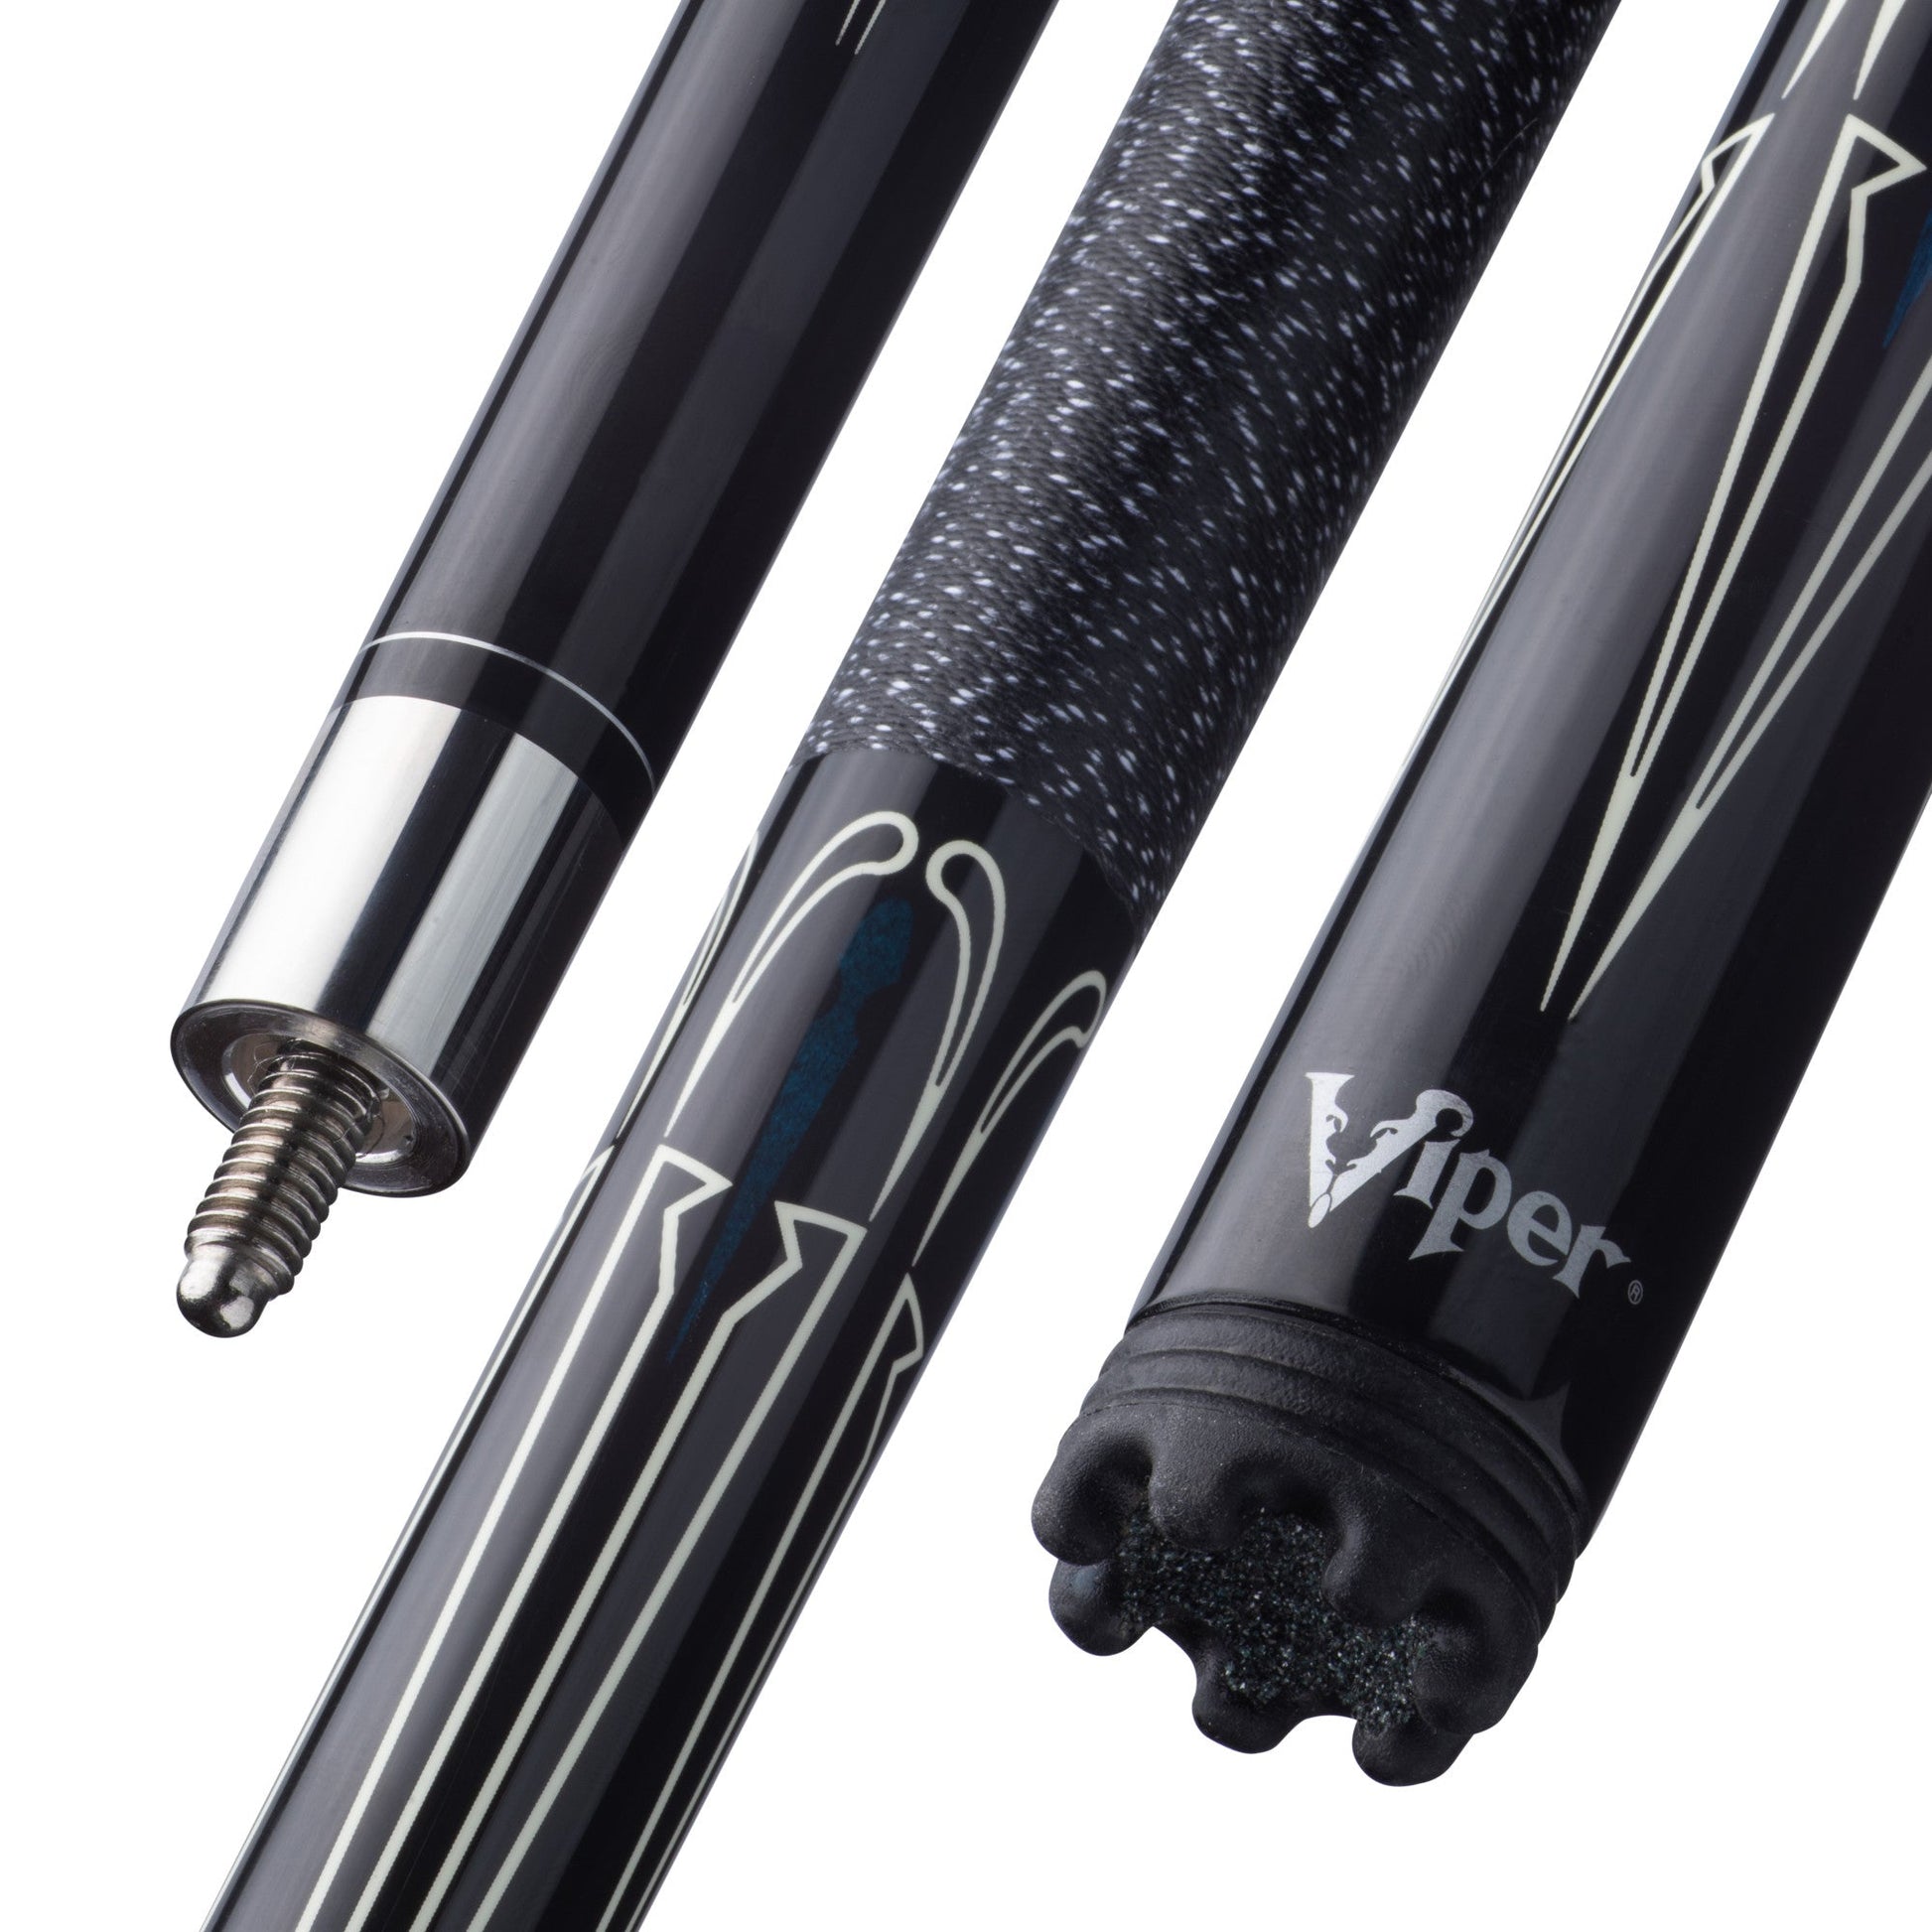 Viper Sinister Black and White 21 Ounce Pool Cue